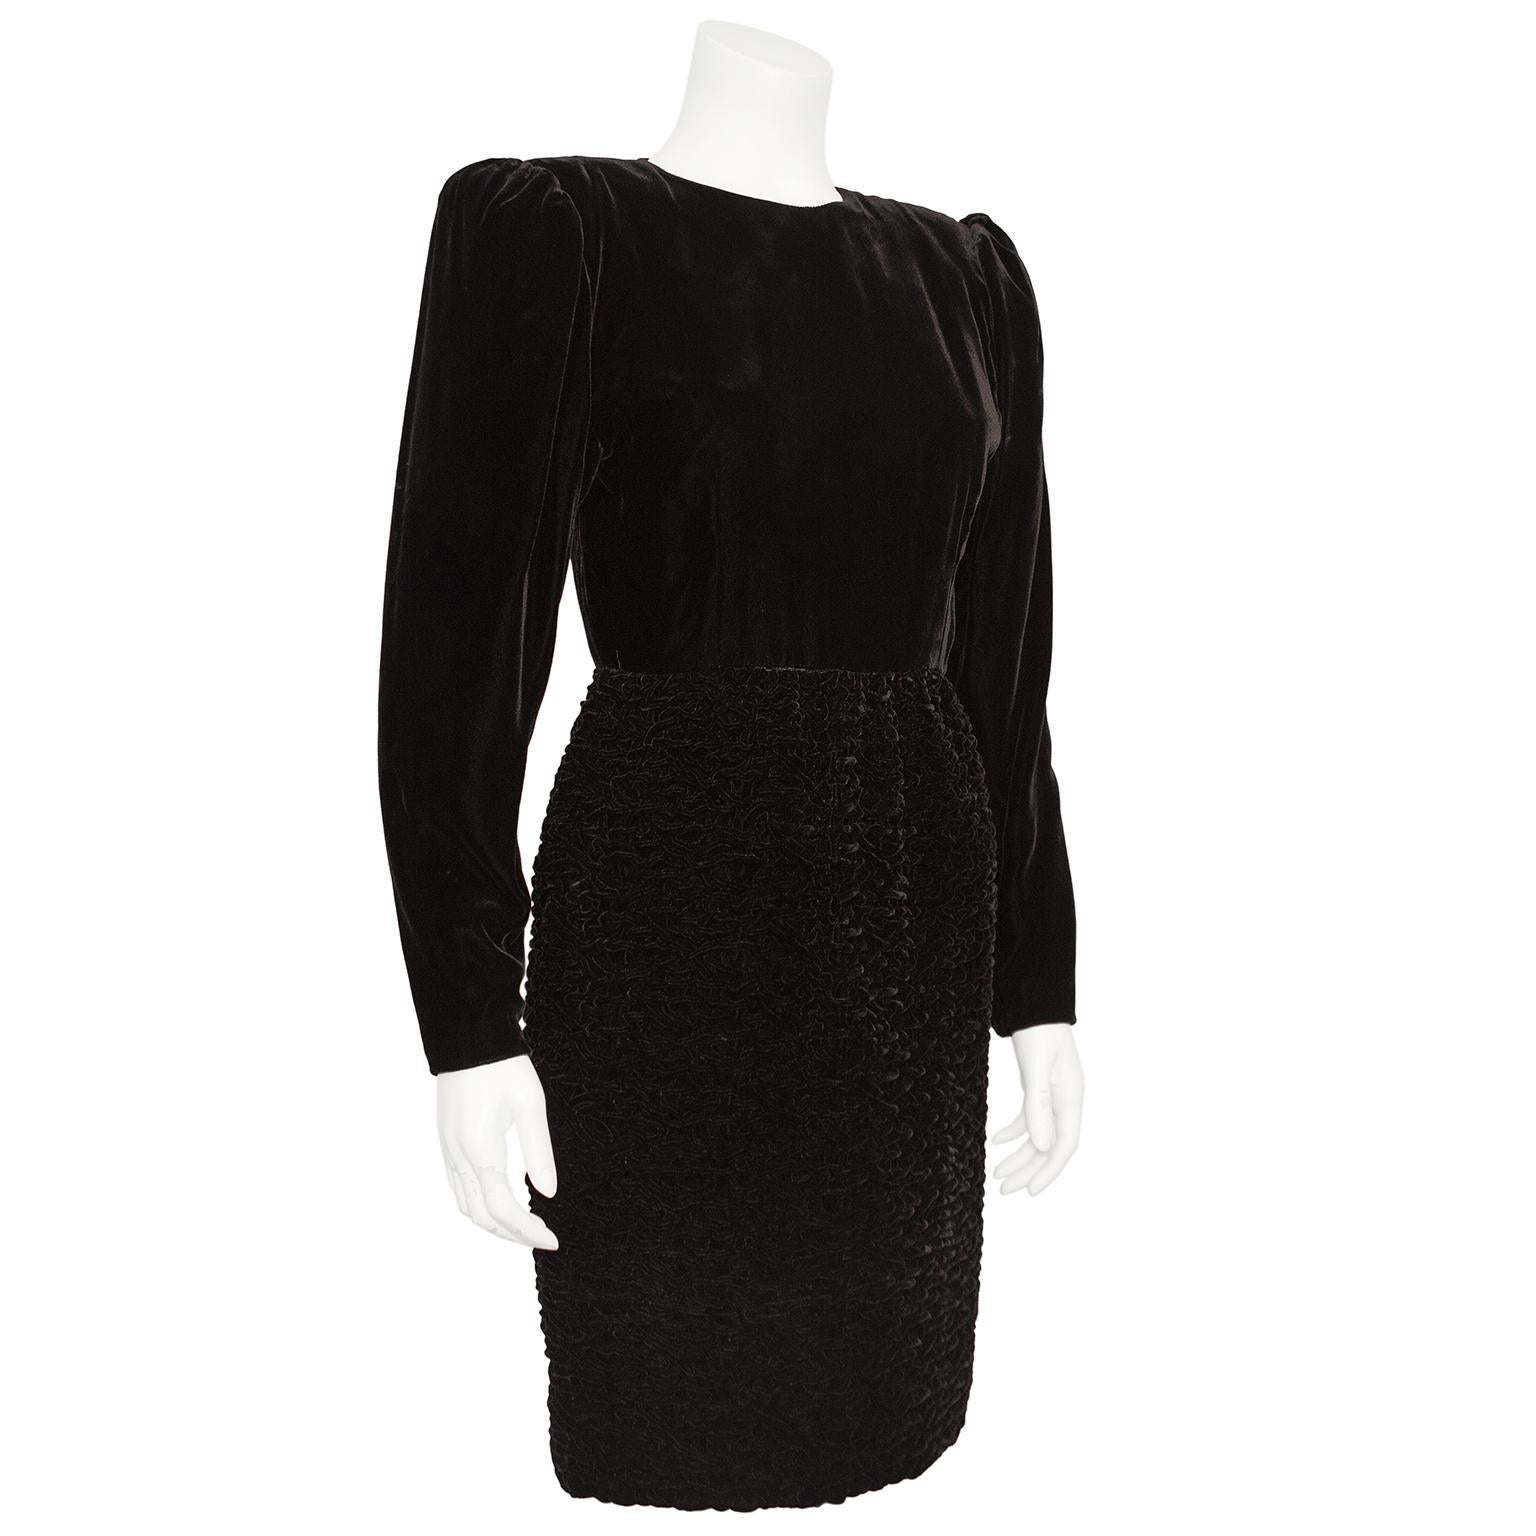 Early 1990s Oscar de la Renta dark brown velvet long sleeve dress with Perisan Lamb style velvet skirt. The puff sleeves have shoulder pads to hold their shape and the smooth velvet ends at the natural waist. The knee length velvet skirt has a